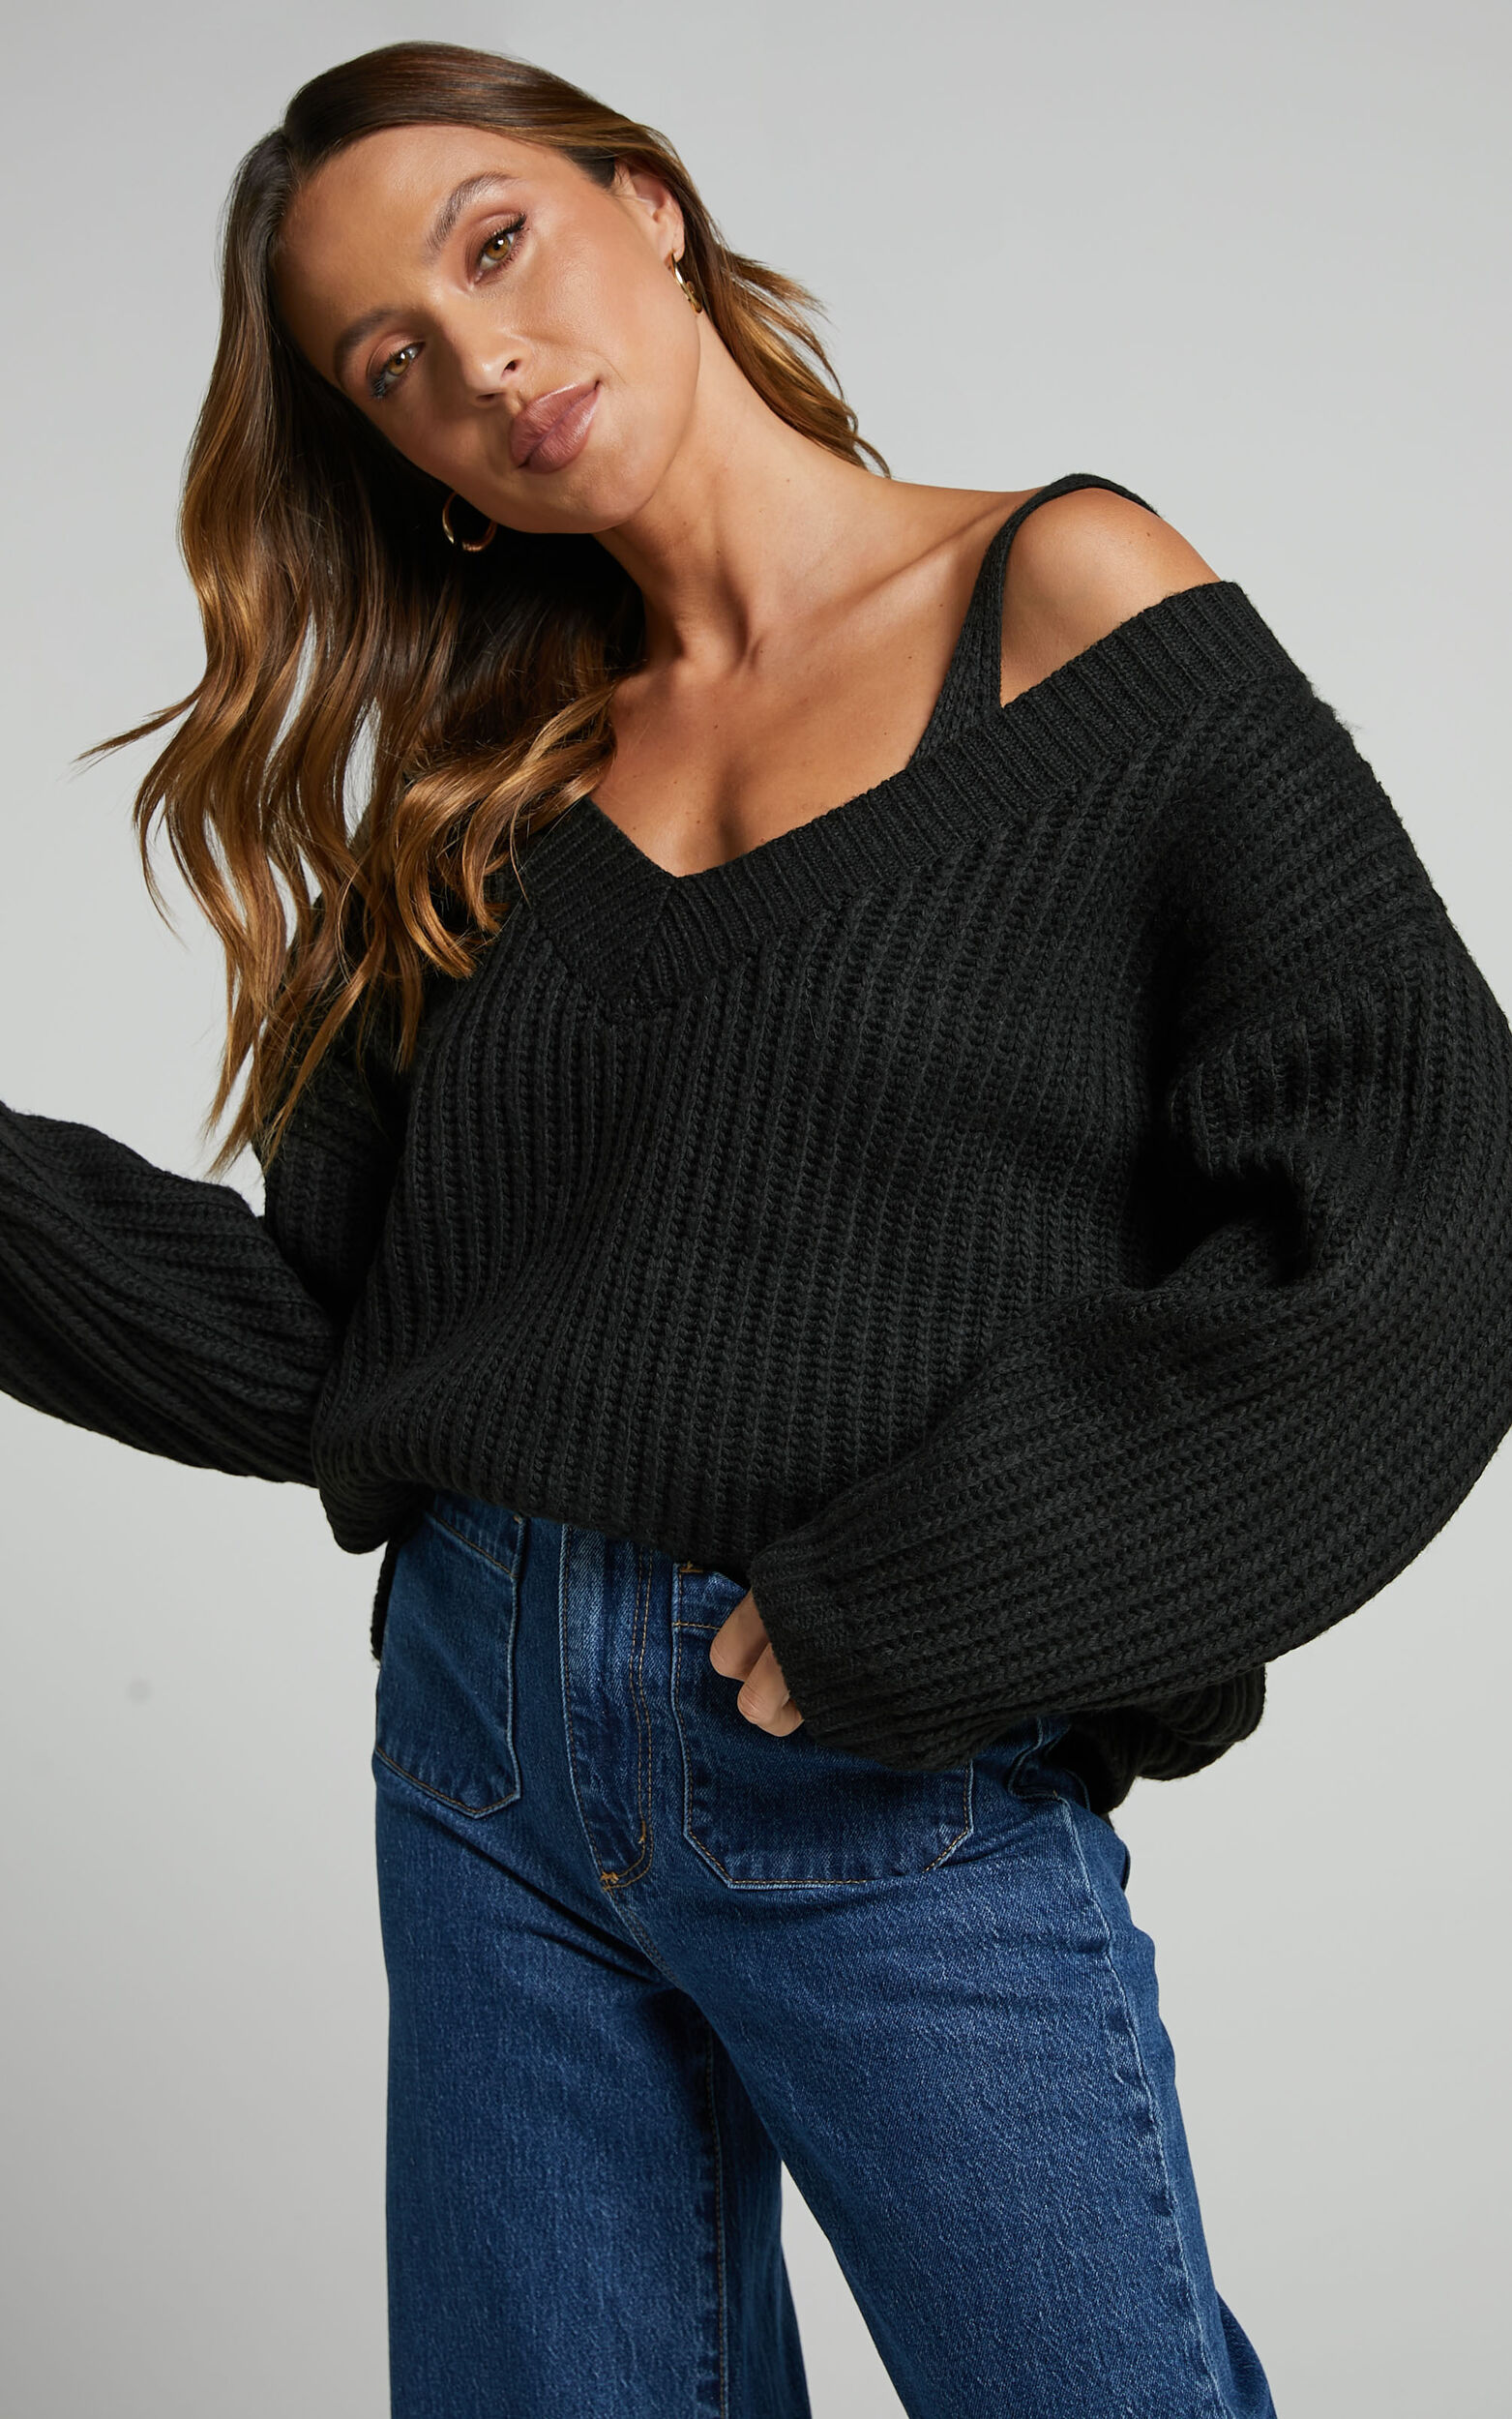 4th & Reckless -Tiana Double Layer Jumper in Black | Showpo